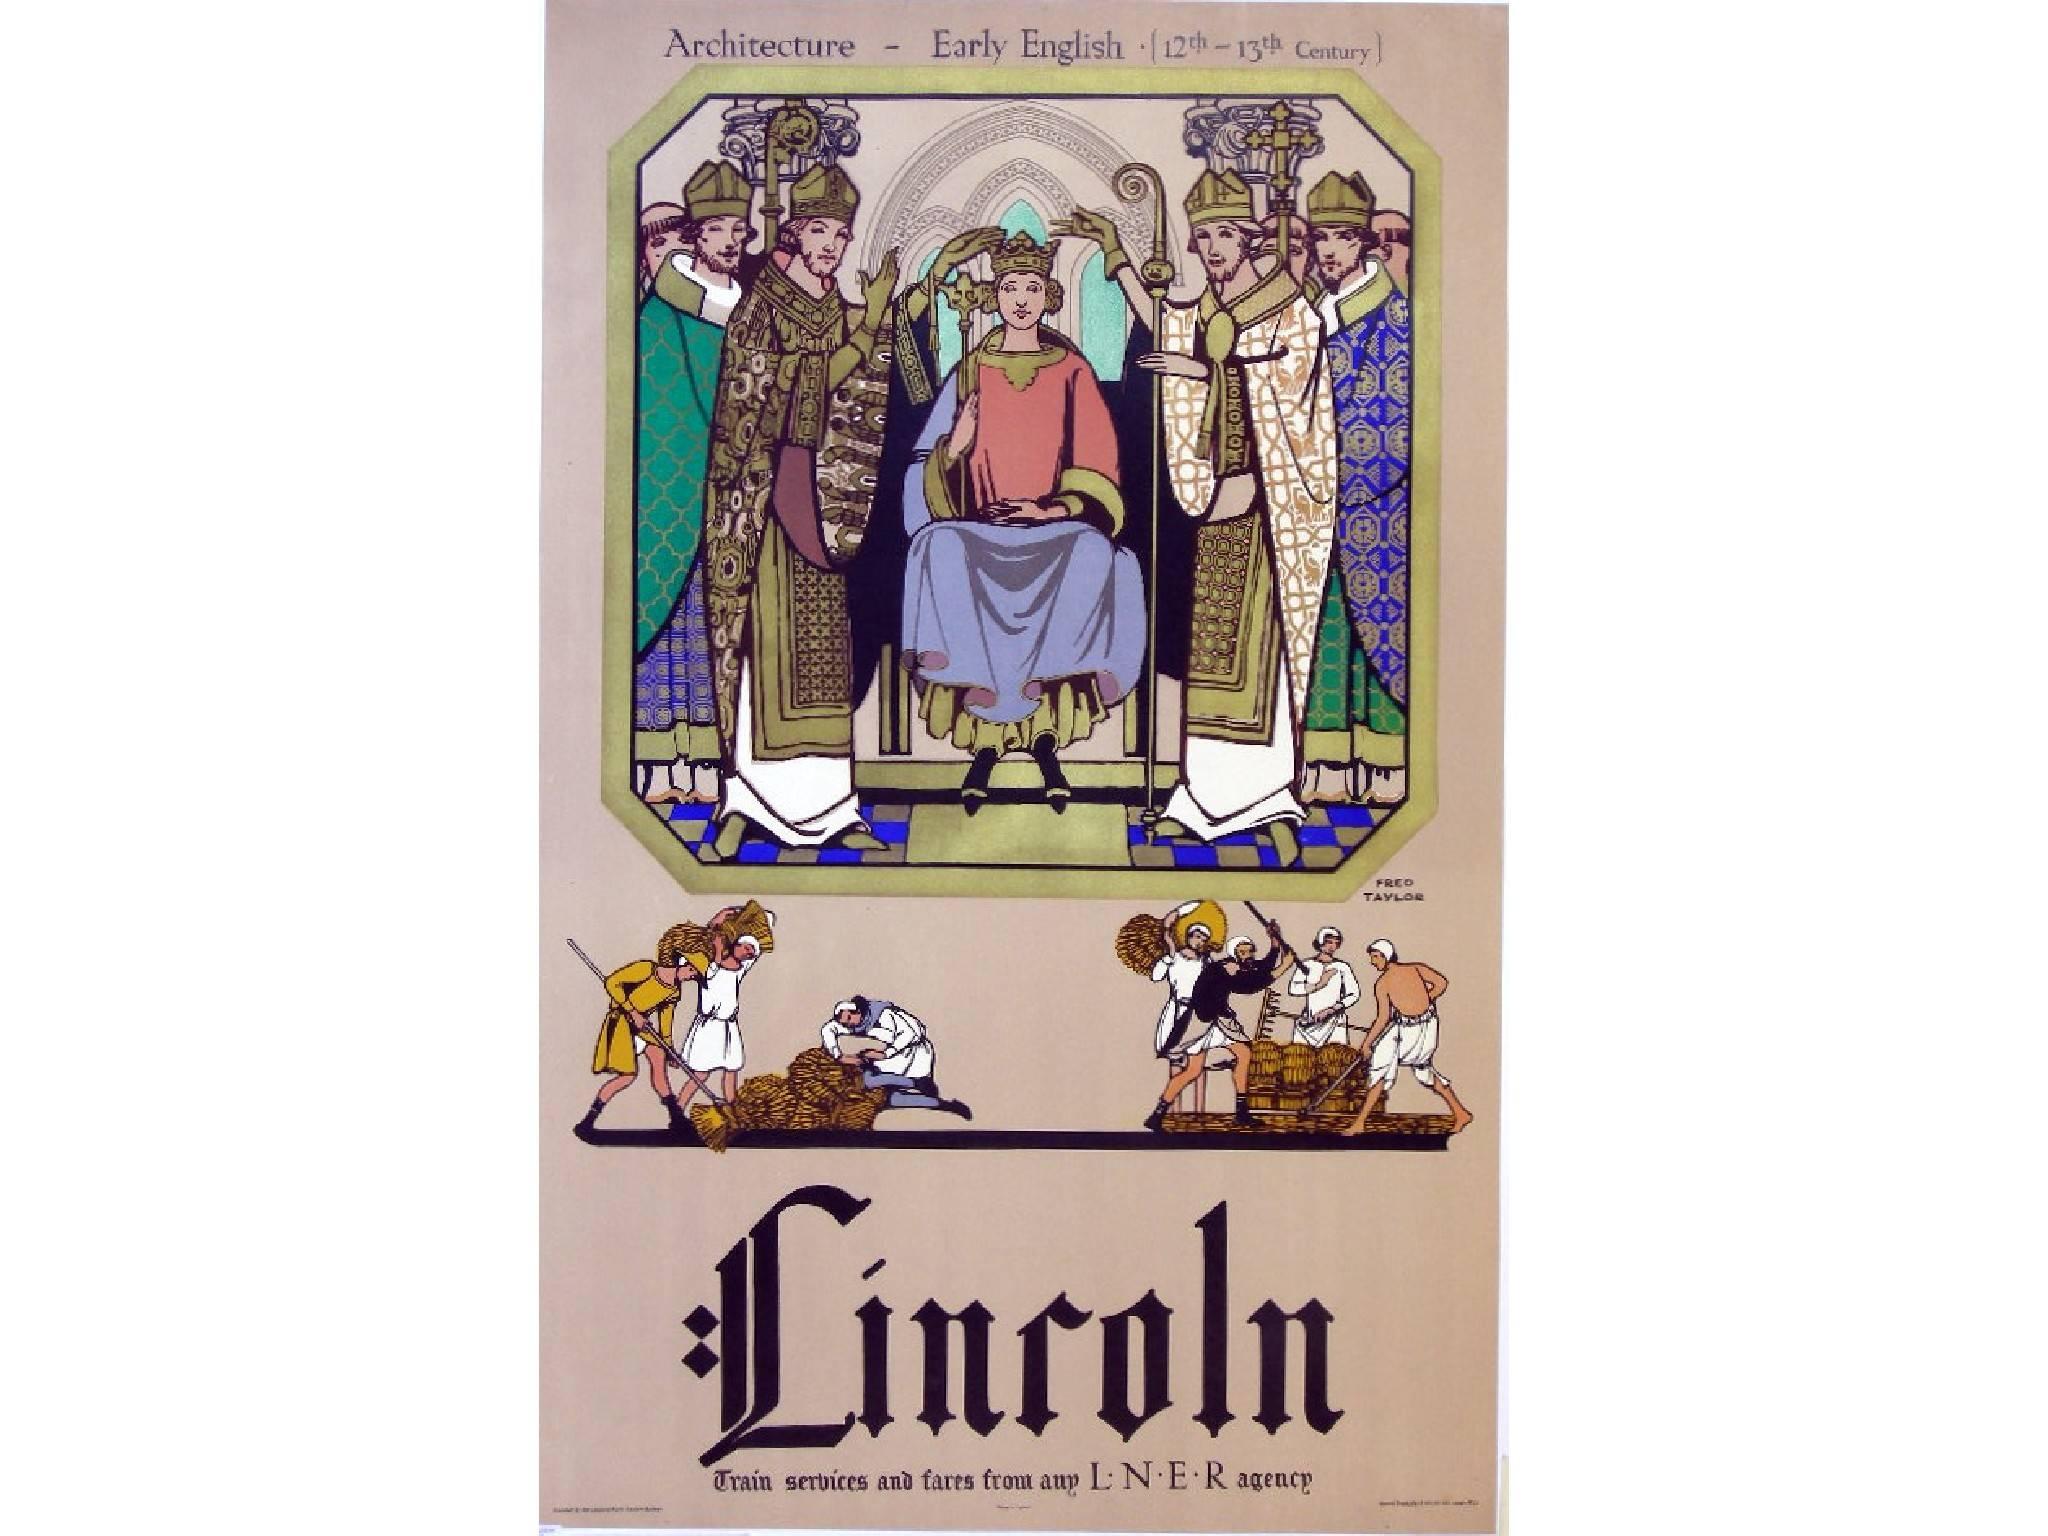 Fred Taylor Lincoln LNER Railway Poster 1930 - Early English Architecture